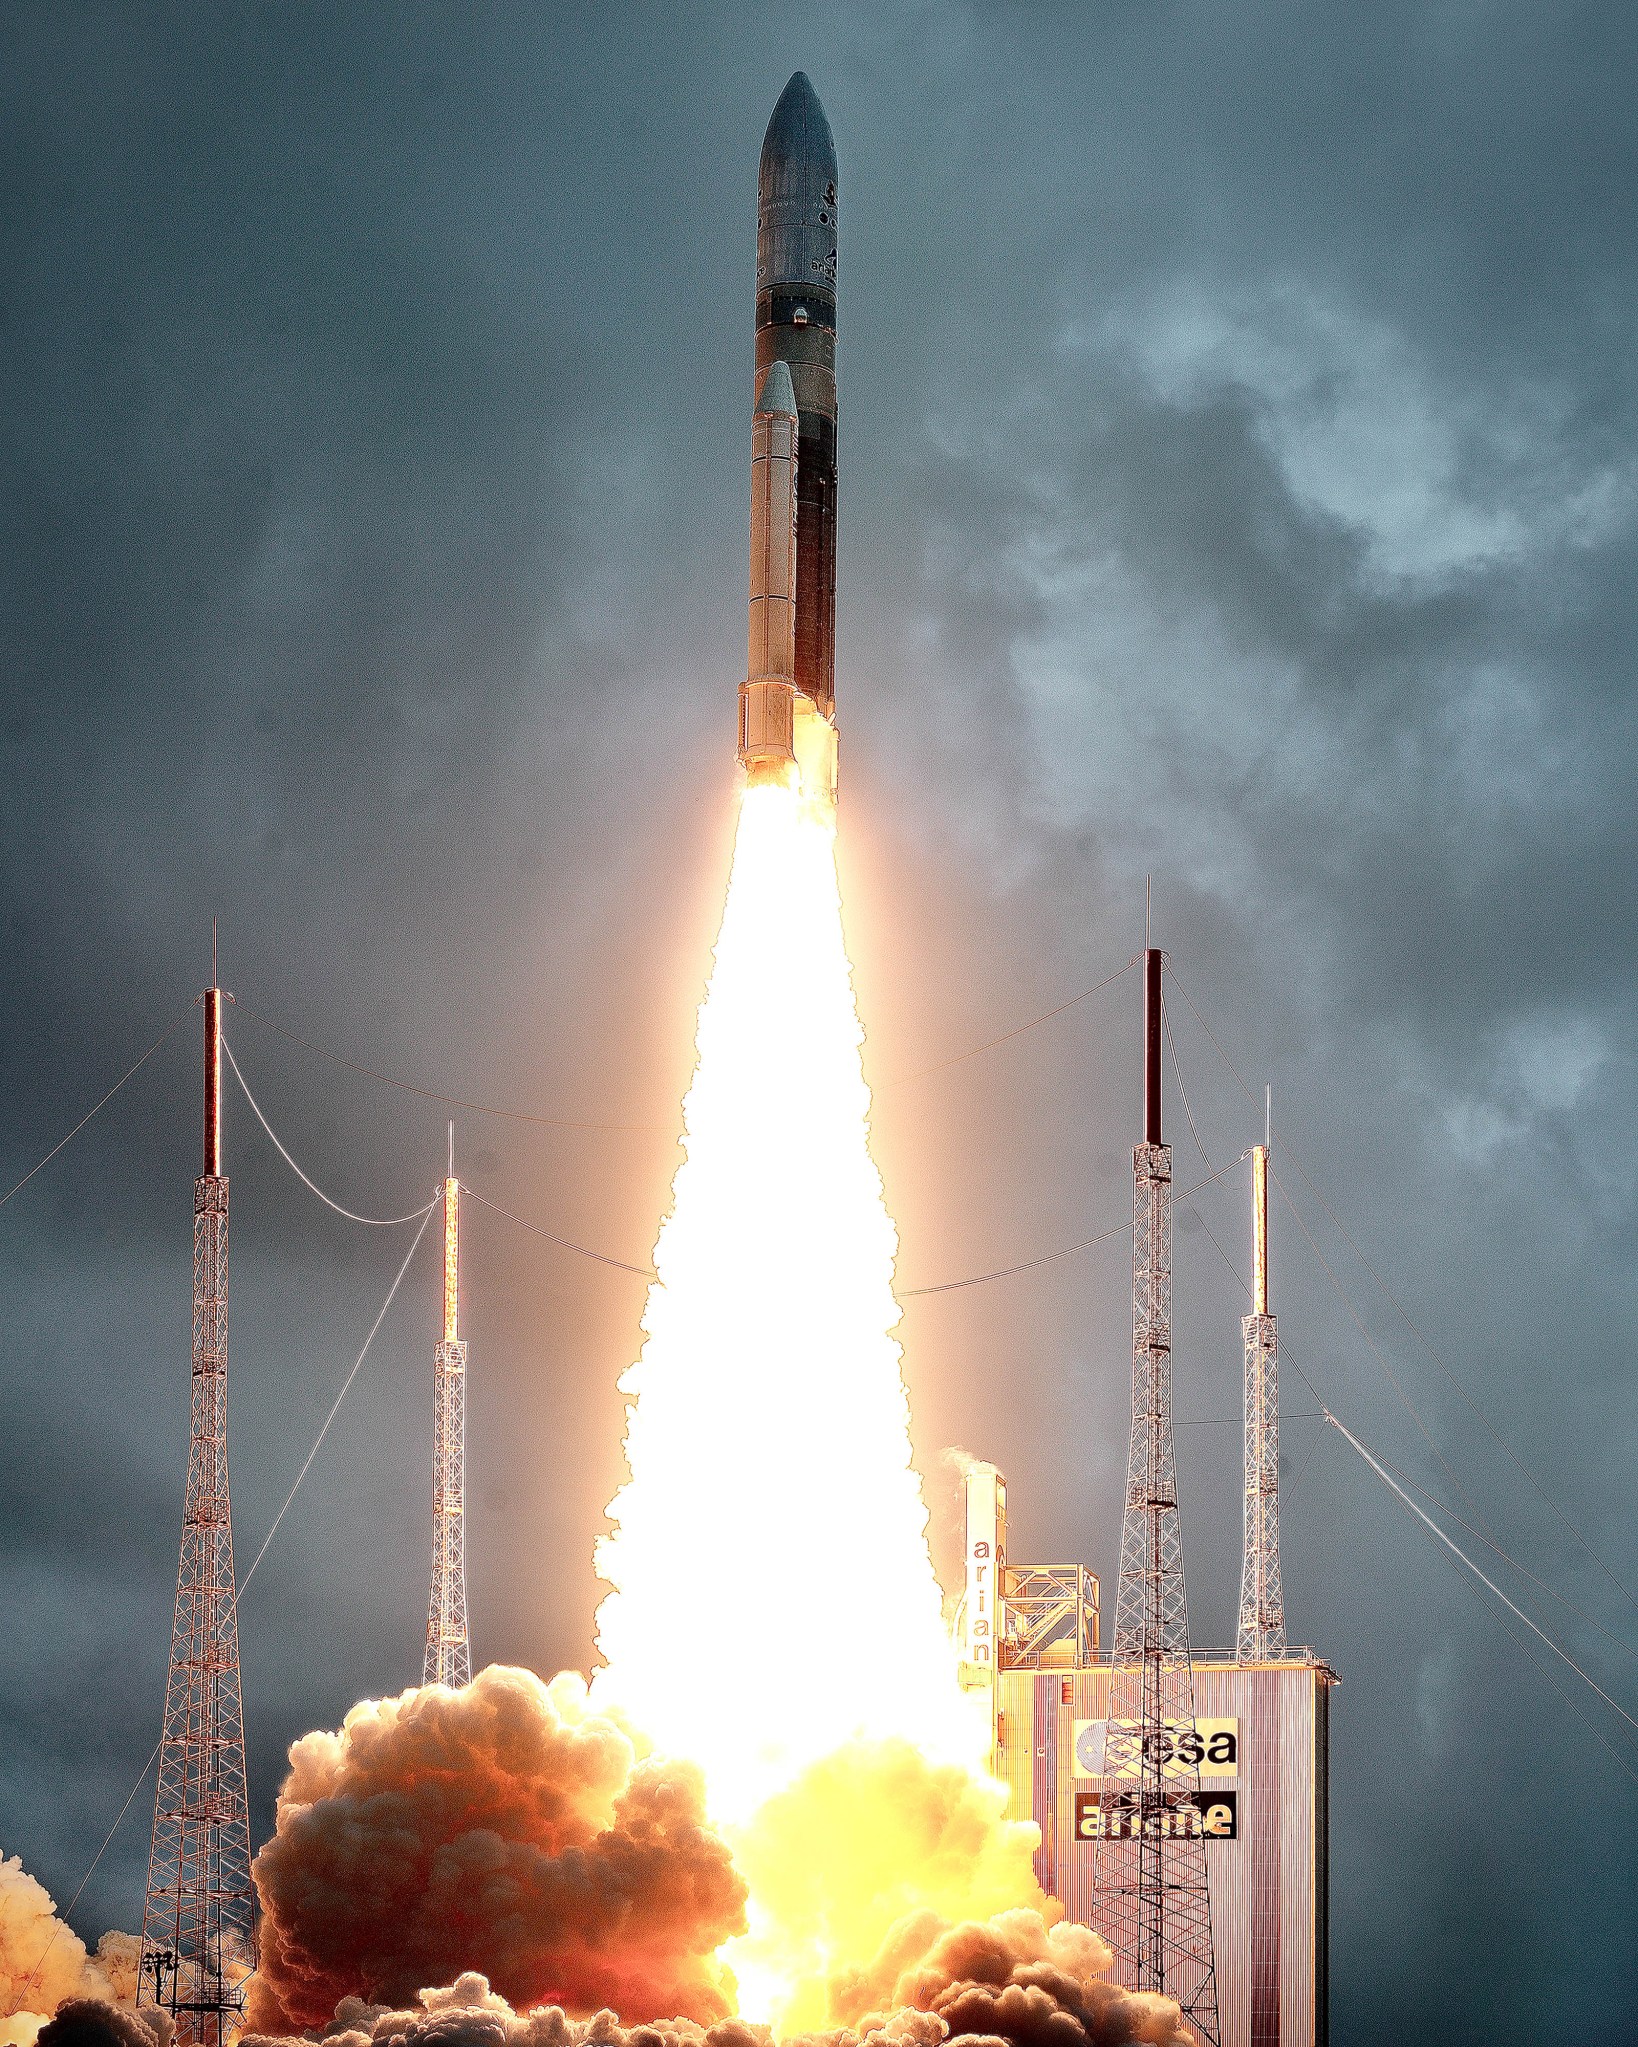 Webb’s Ariane 5 rocket launches from Europe’s Spaceport in Kourou, French Guiana. A glowing, white-yellow stream of gas and fire is streaming from the rocket towards the ground below. The ground is covered with puffy clouds of pink-orange gas. In the background, lit up by the launch, is a building that is emblazoned with dark blue European Space Agency (ESA) and Ariane logos. The sky is a dark blue-gray and largely cloudy.